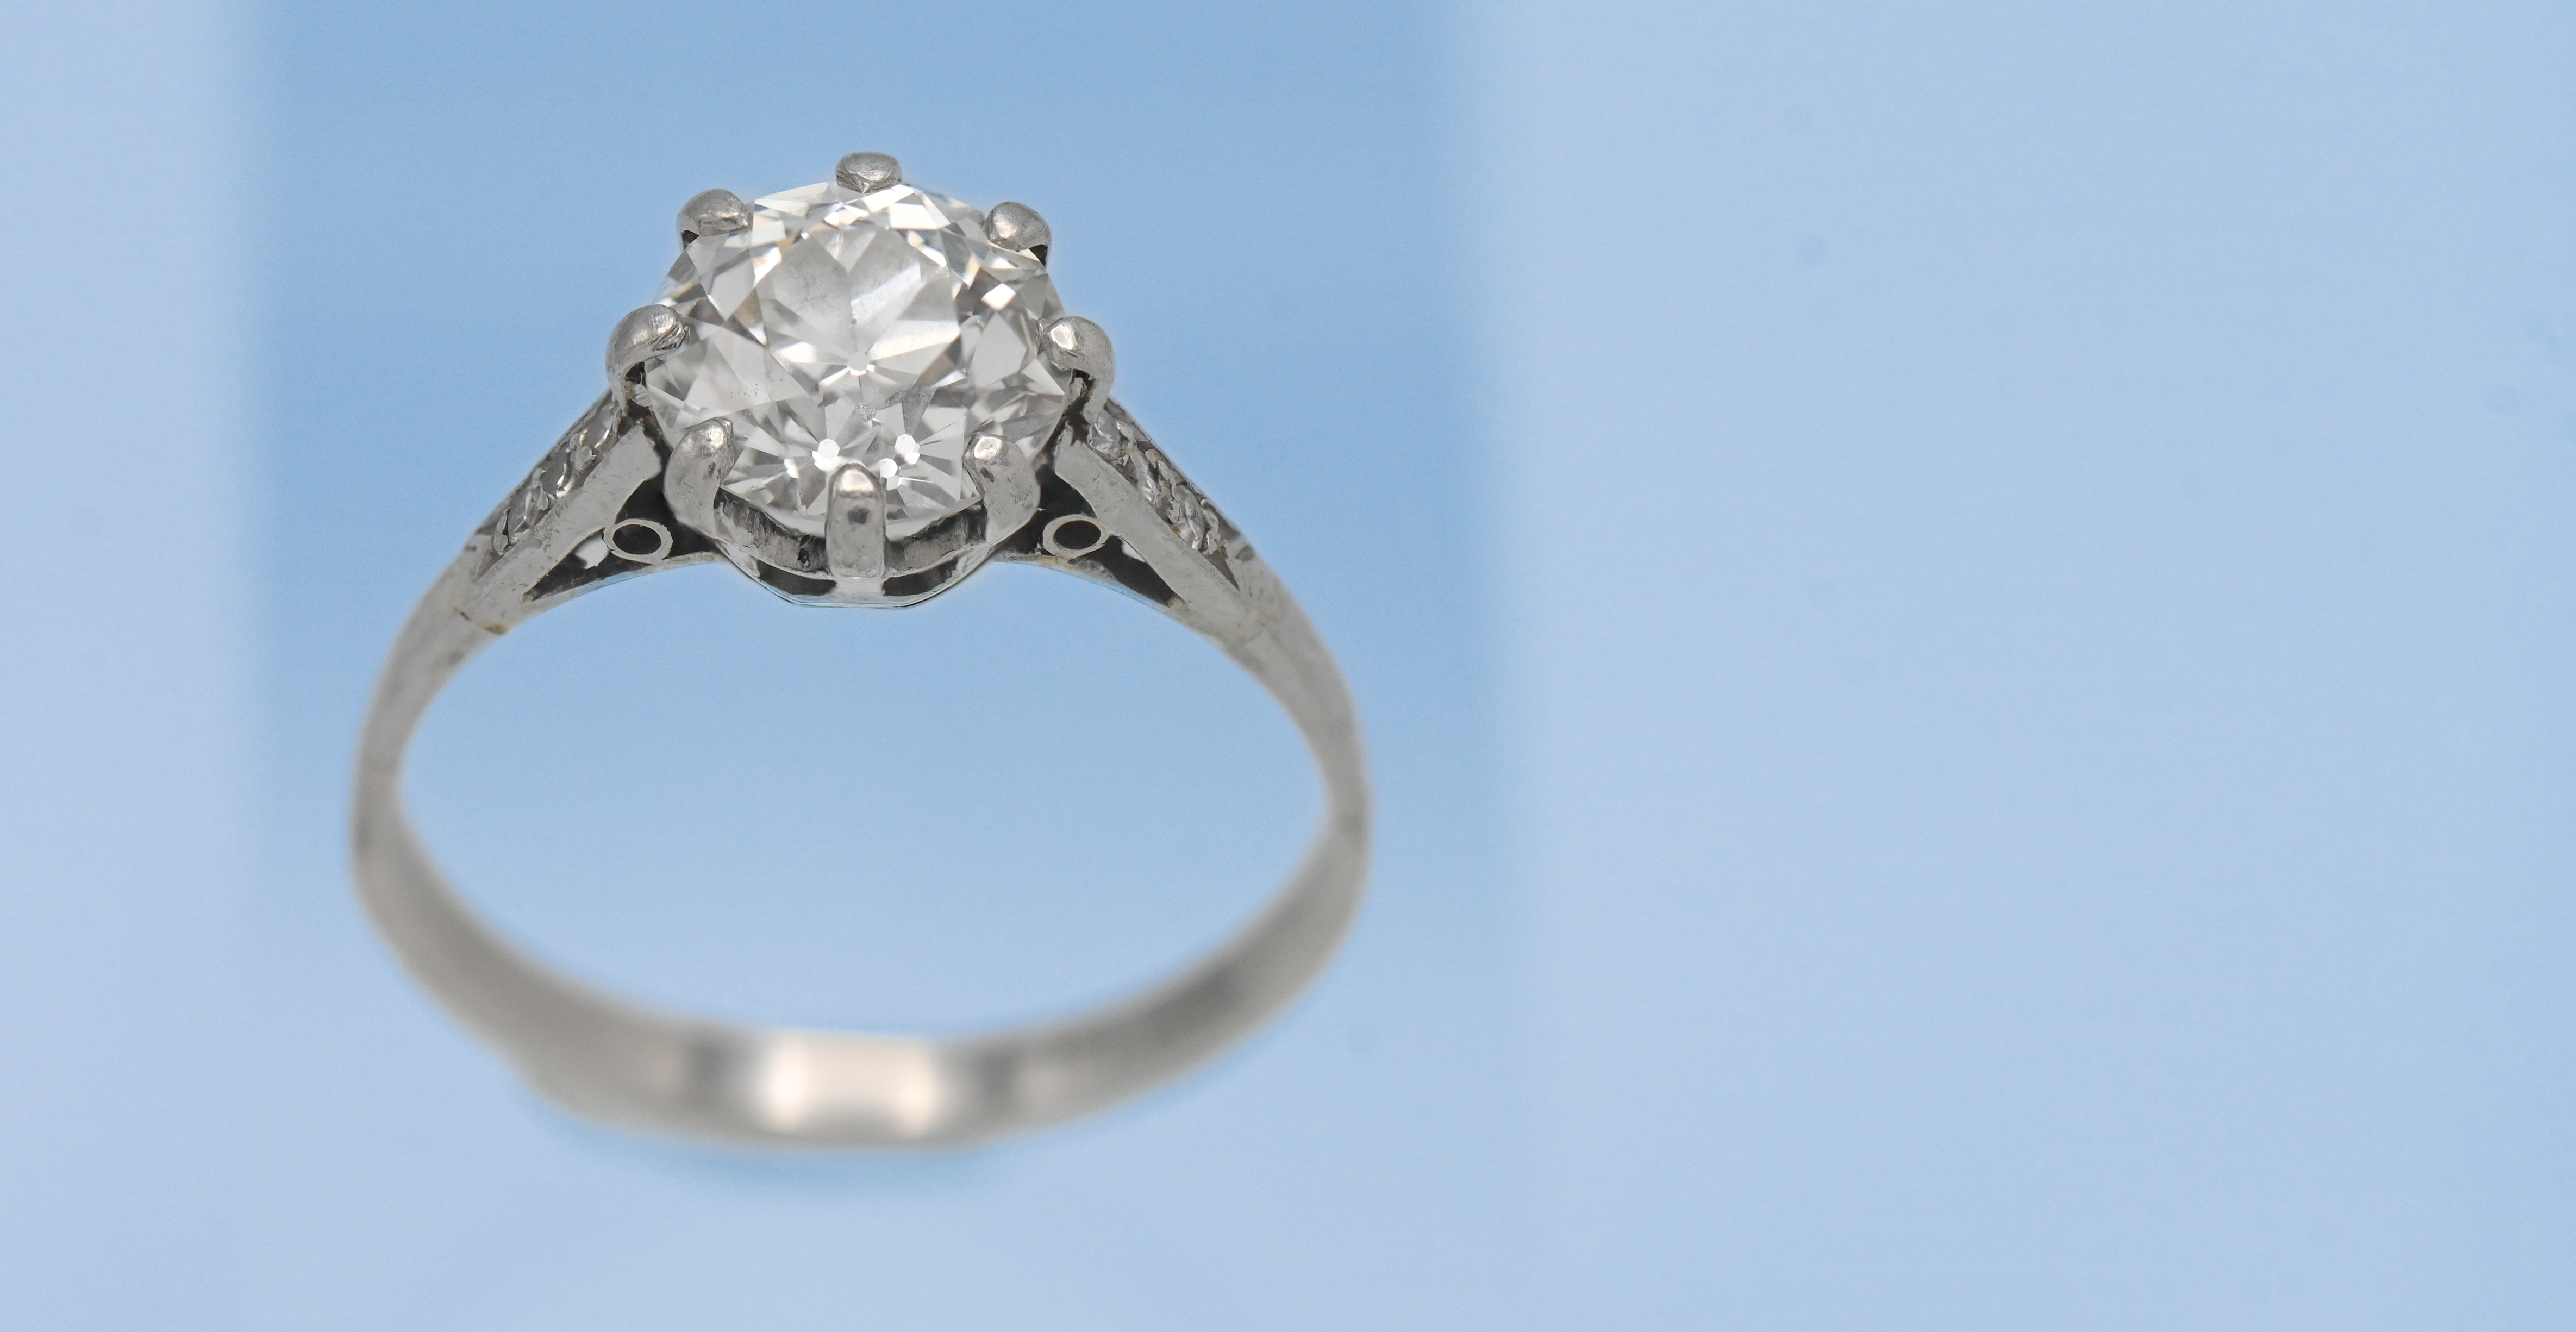 A fine diamond and platinum solitaire ring, set with an old brilliant cut diamond - Image 4 of 5